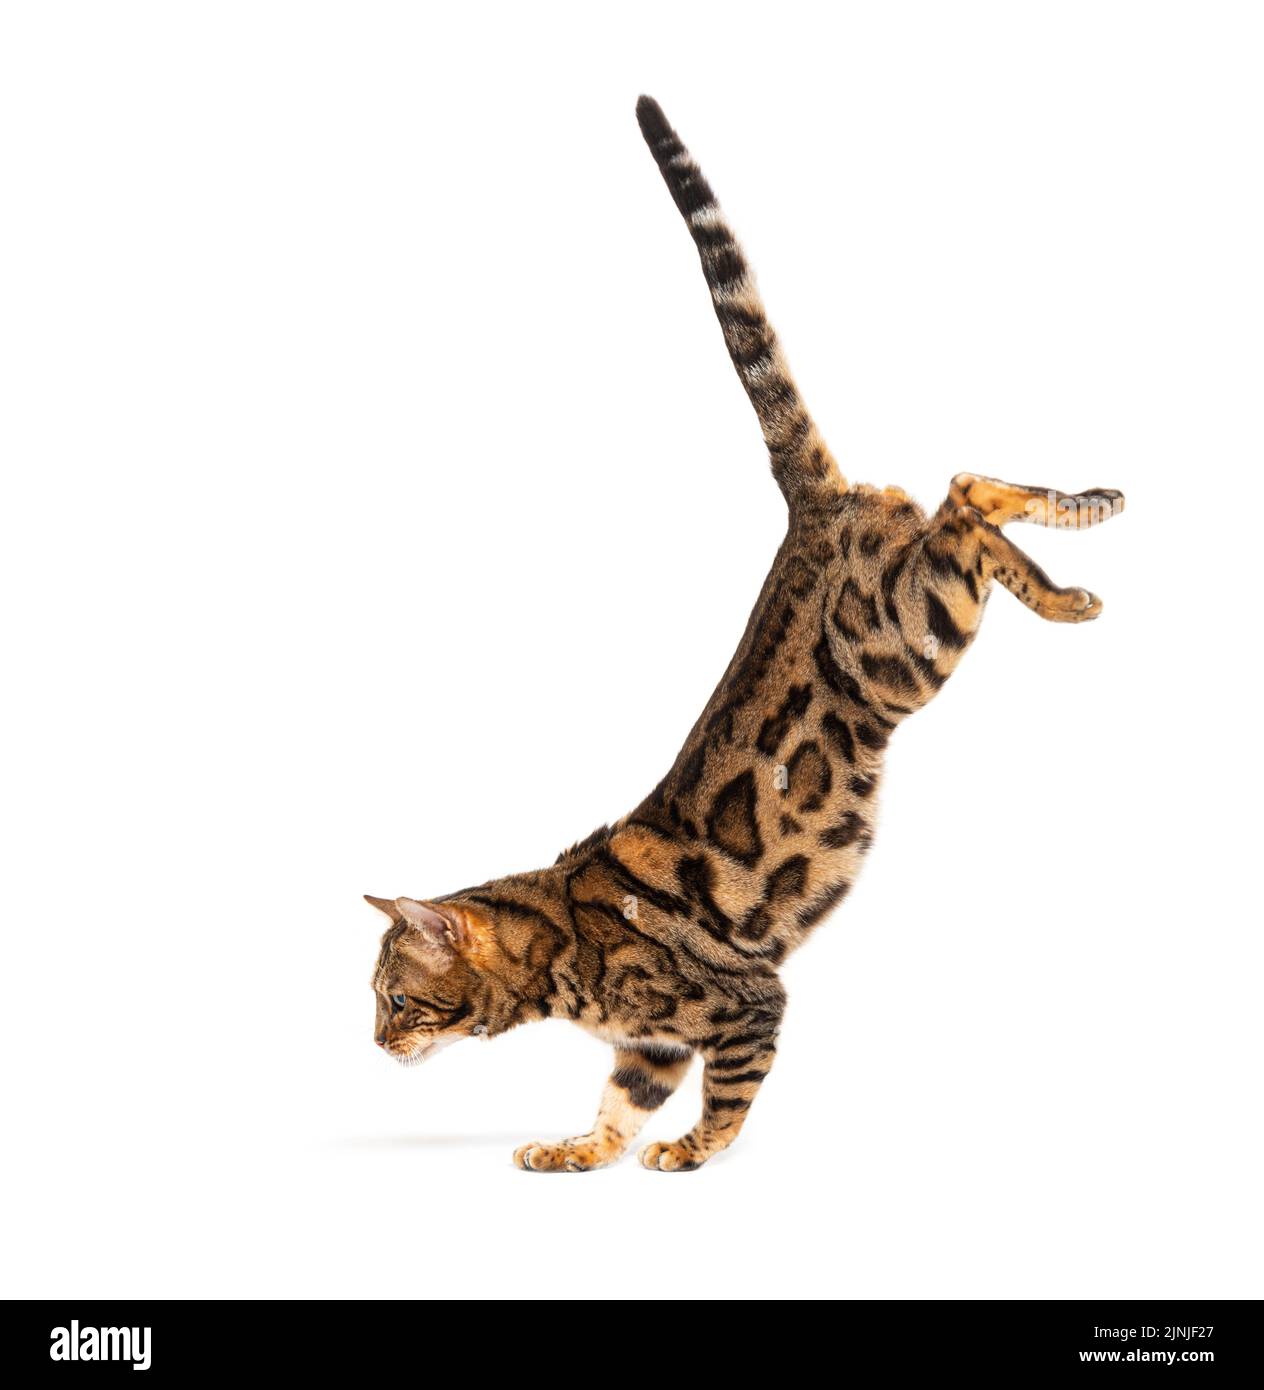 Side view of a Bengal cat jumping down, isolated on white Stock Photo